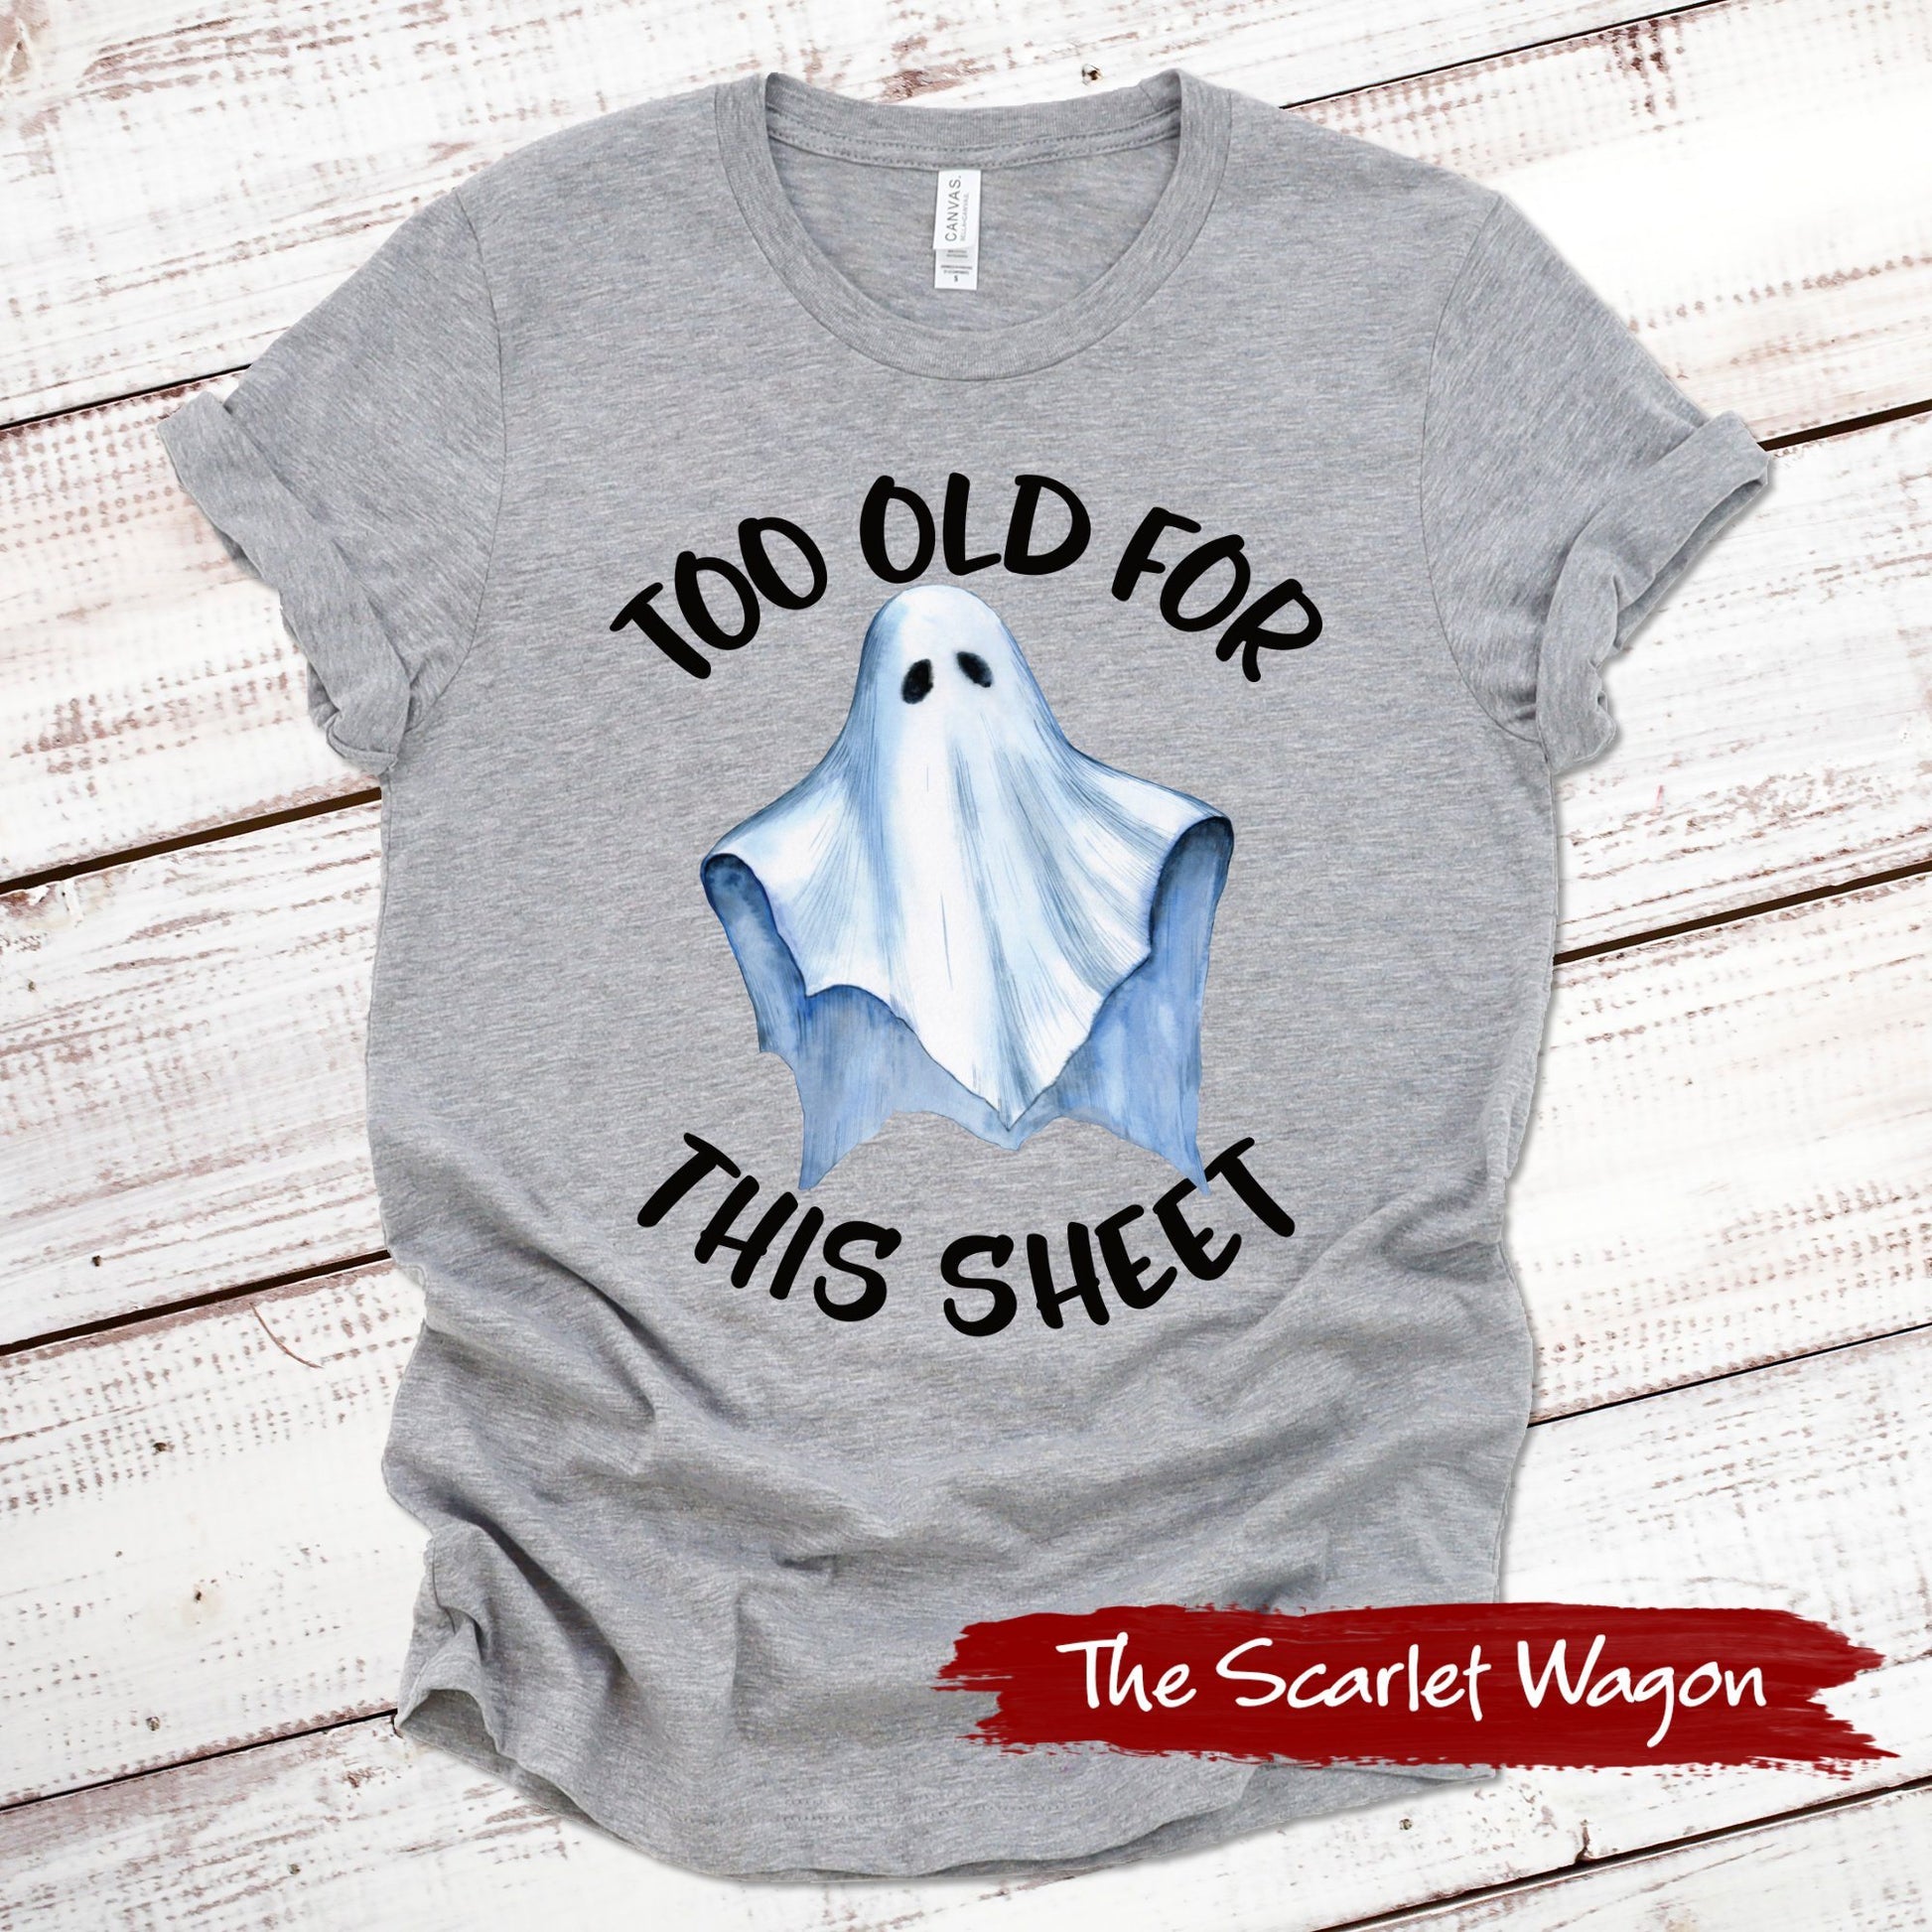 Too Old for This Sheet Halloween Shirt Scarlet Wagon Athletic Heather XS 